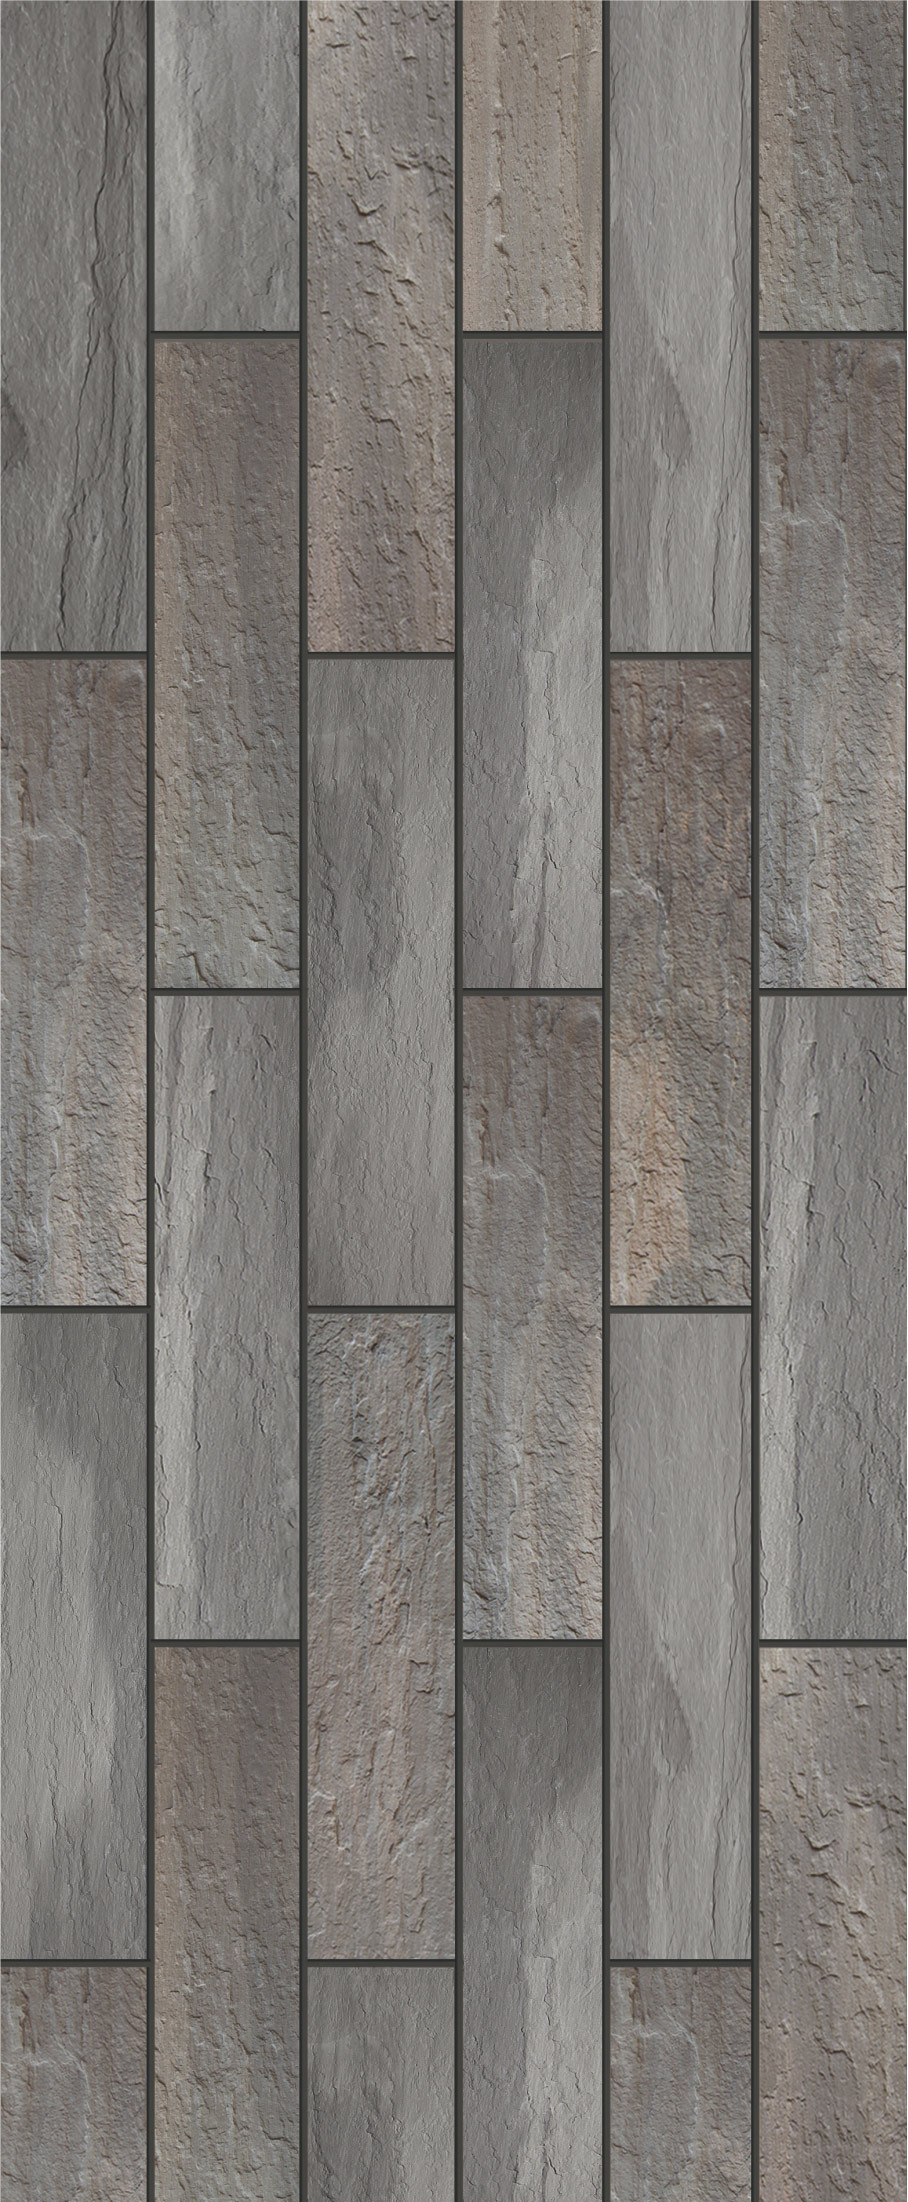 Oasis-Stone-combination-of-single-size-tiles-900x200mm-with-seam-8mm-of-043-grout-color